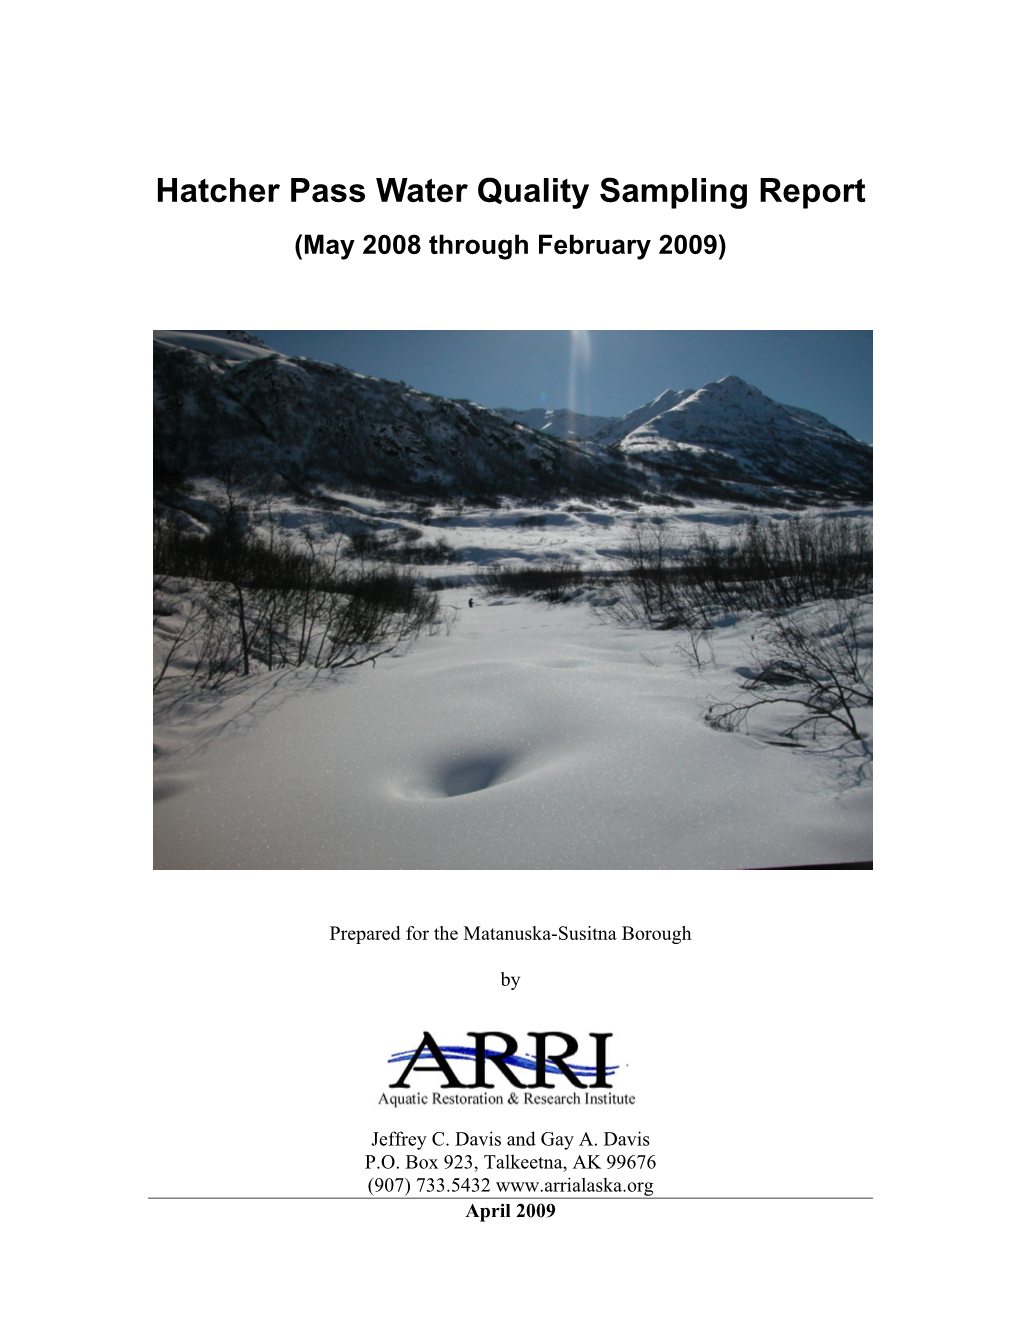 Hatcher Pass Water Quality Sampling Report (May 2008 Through February 2009)